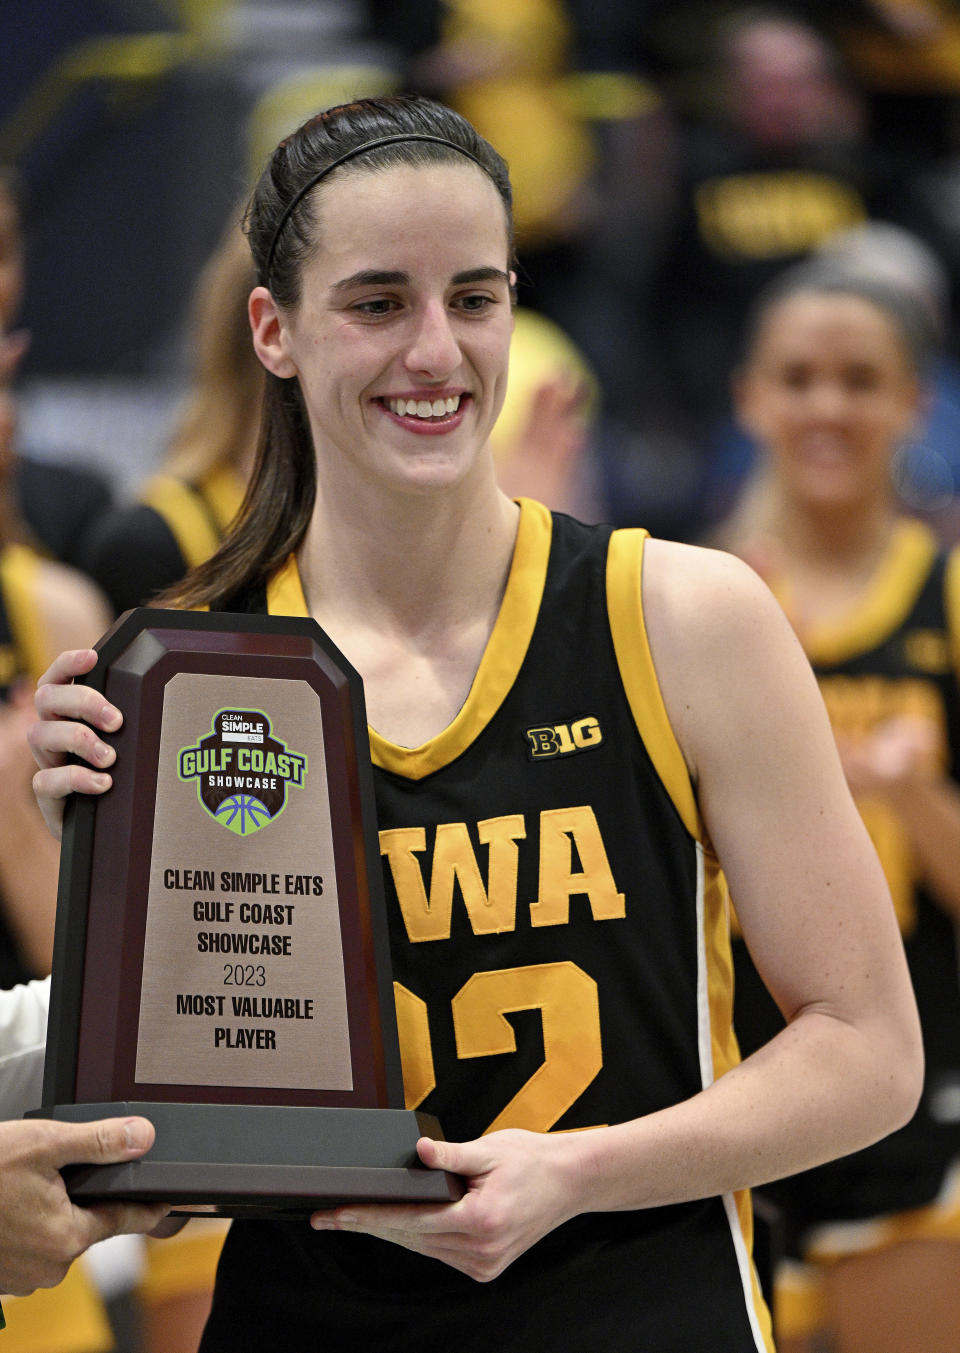 Iowa's Caitlin Clark is named Most Valuable Player after the final game against Kansas State in the NCAA college basketball Gulf Coast Showcase, Sunday, Nov. 26, 2023, in Estero, Fla. (AP Photo/Chris Tilley)